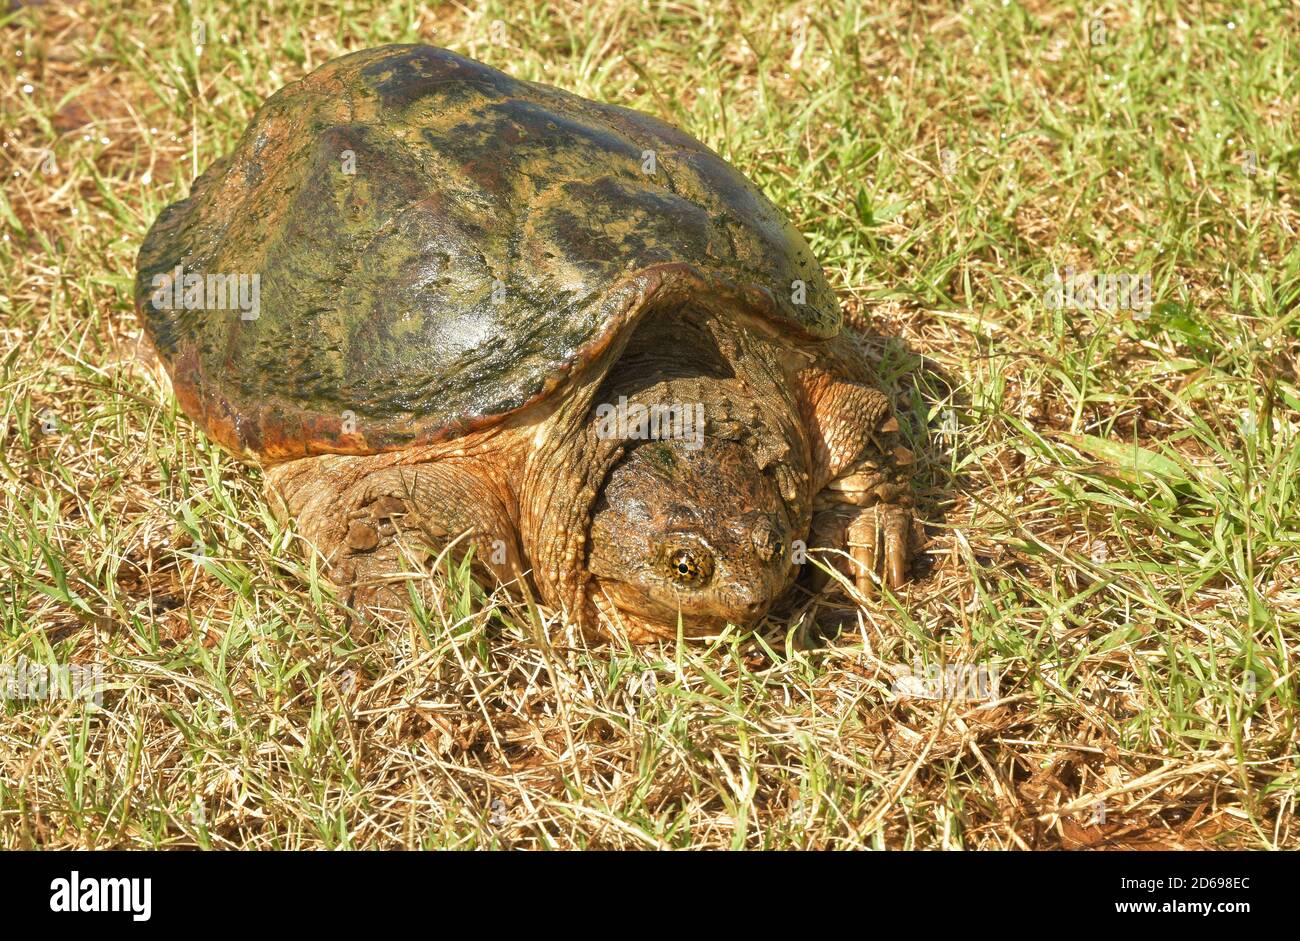 Common Snapping Turtle in grass on a summer day Stock Photo